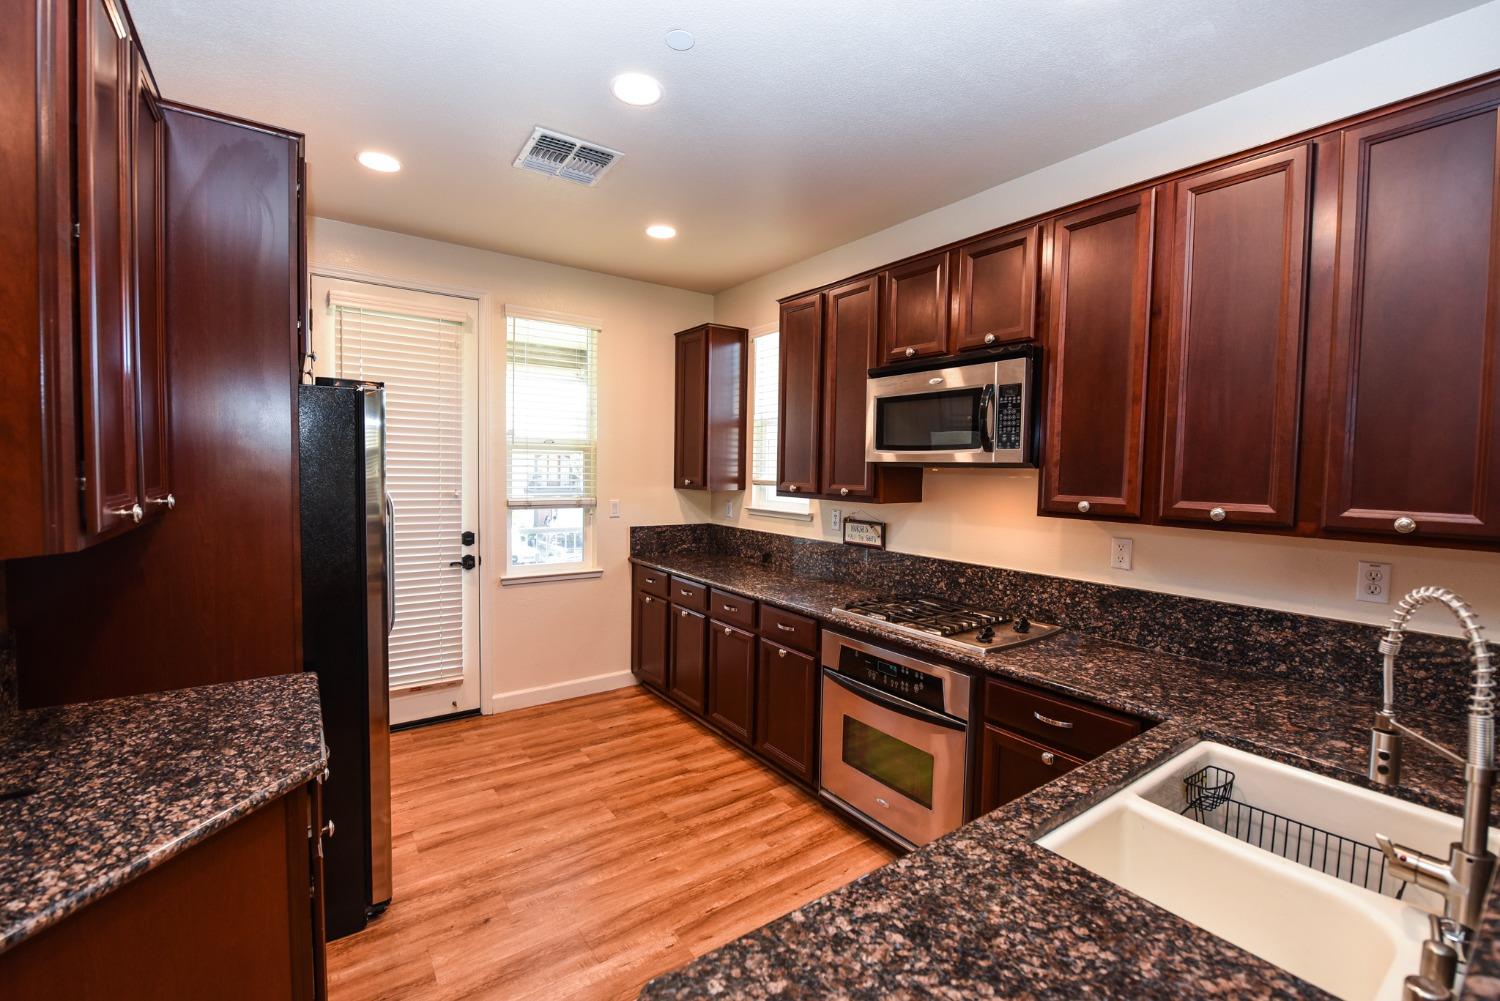 a kitchen with stainless steel appliances granite countertop wooden cabinets a refrigerator and a sink